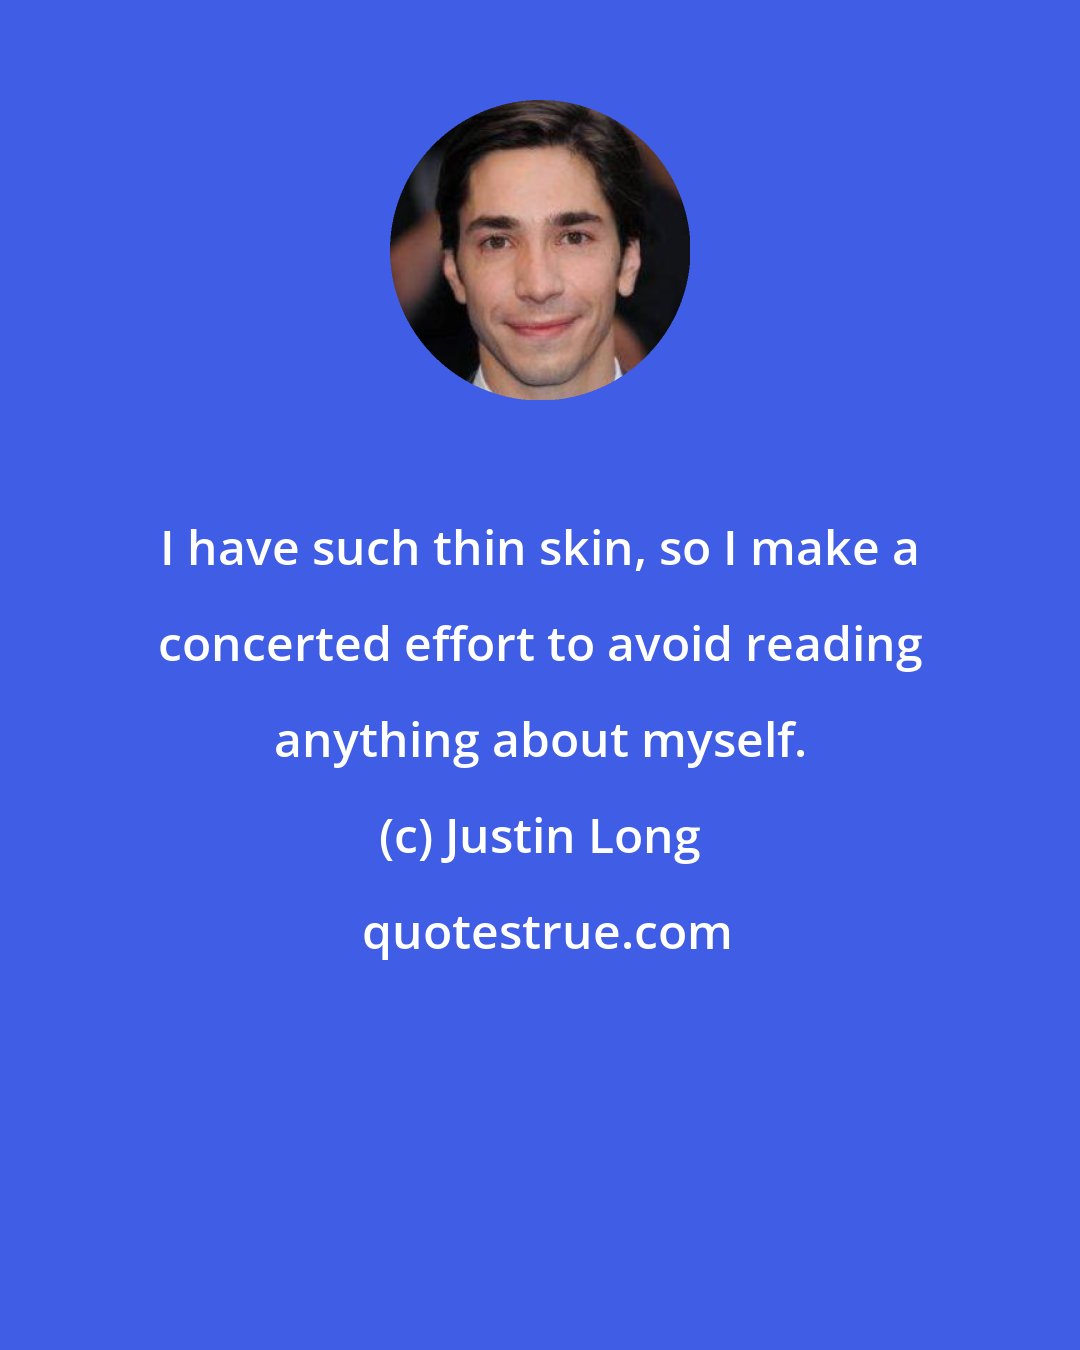 Justin Long: I have such thin skin, so I make a concerted effort to avoid reading anything about myself.